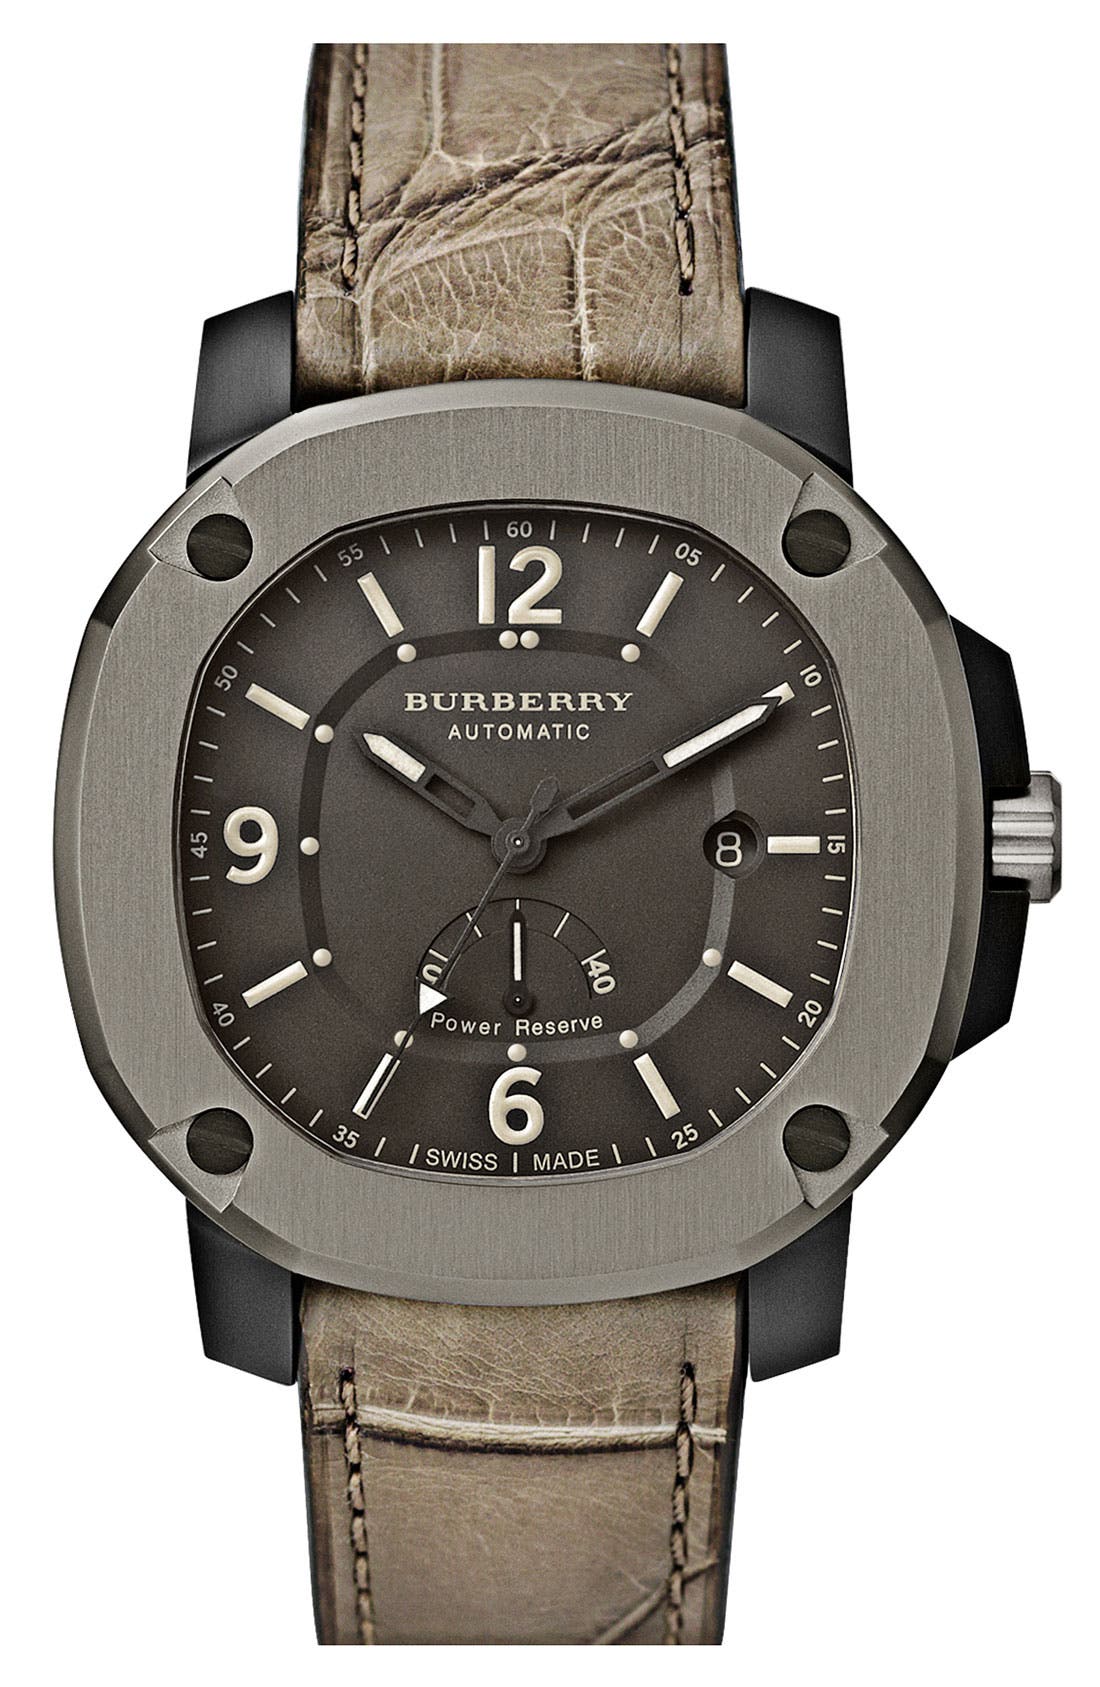 burberry automatic watches